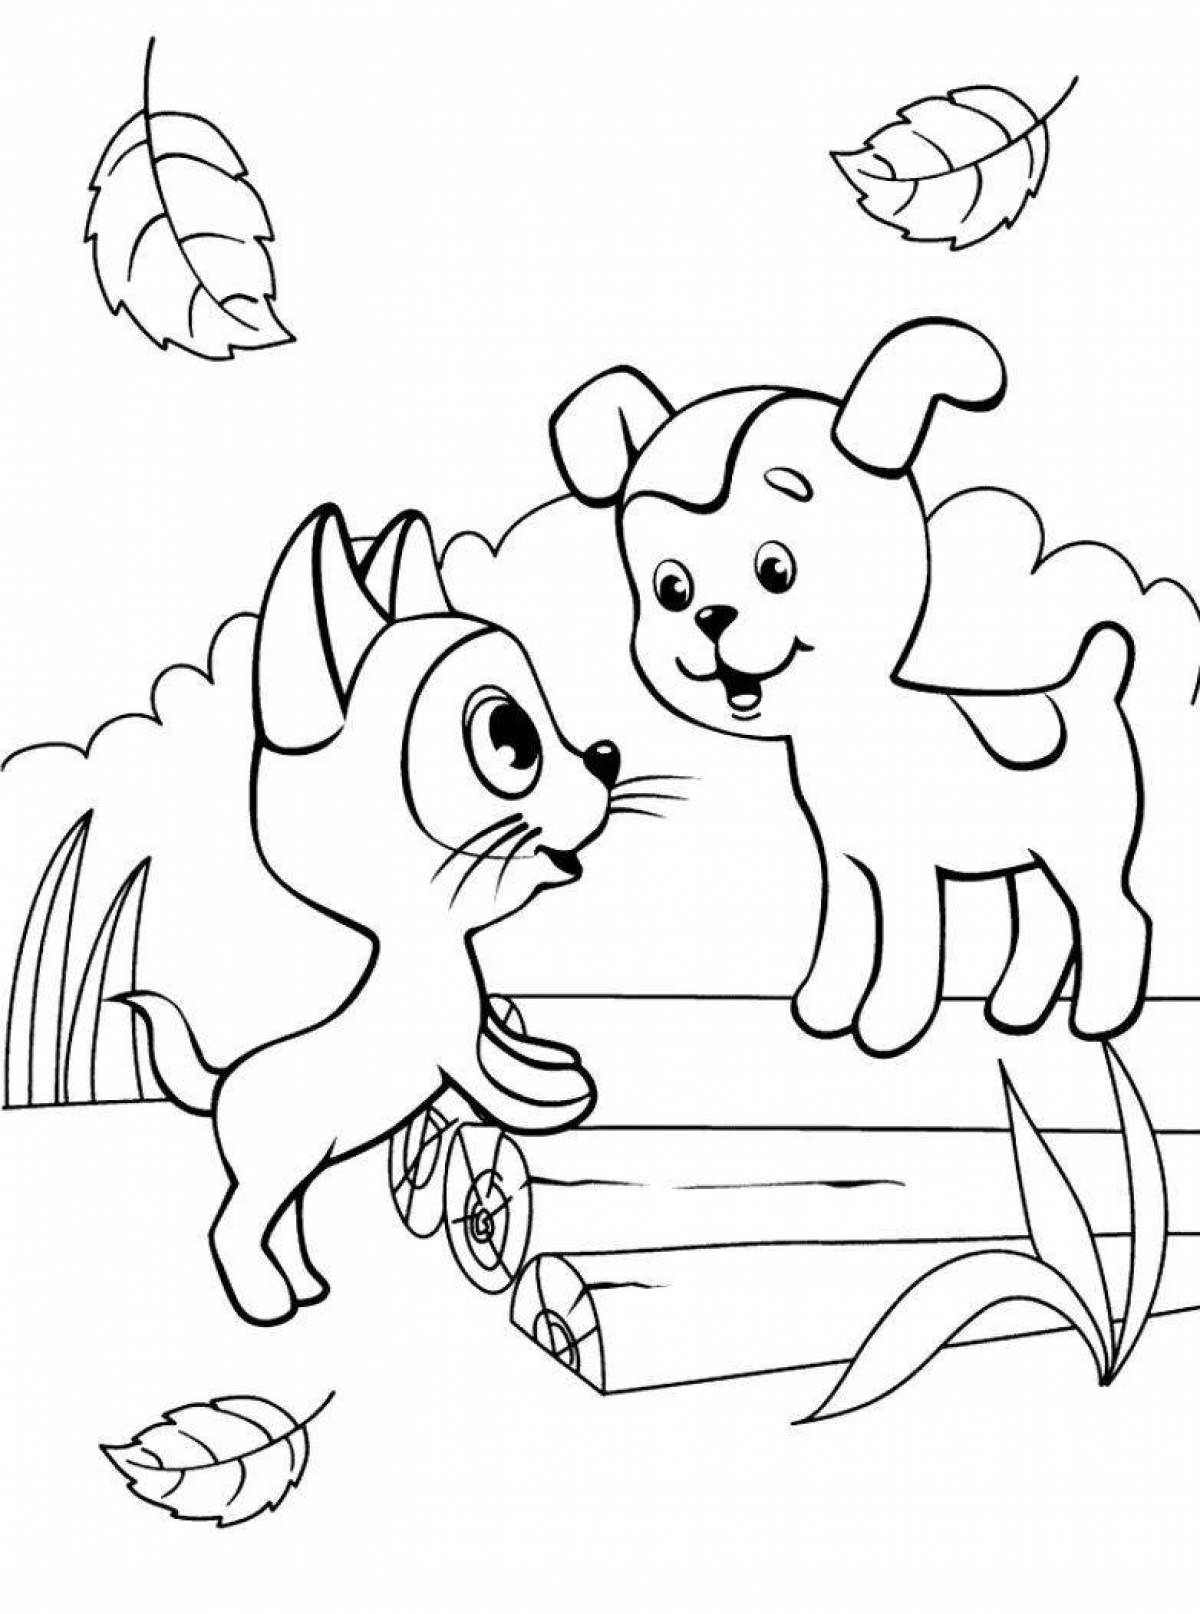 Colorful-zoological coloring book who said meow